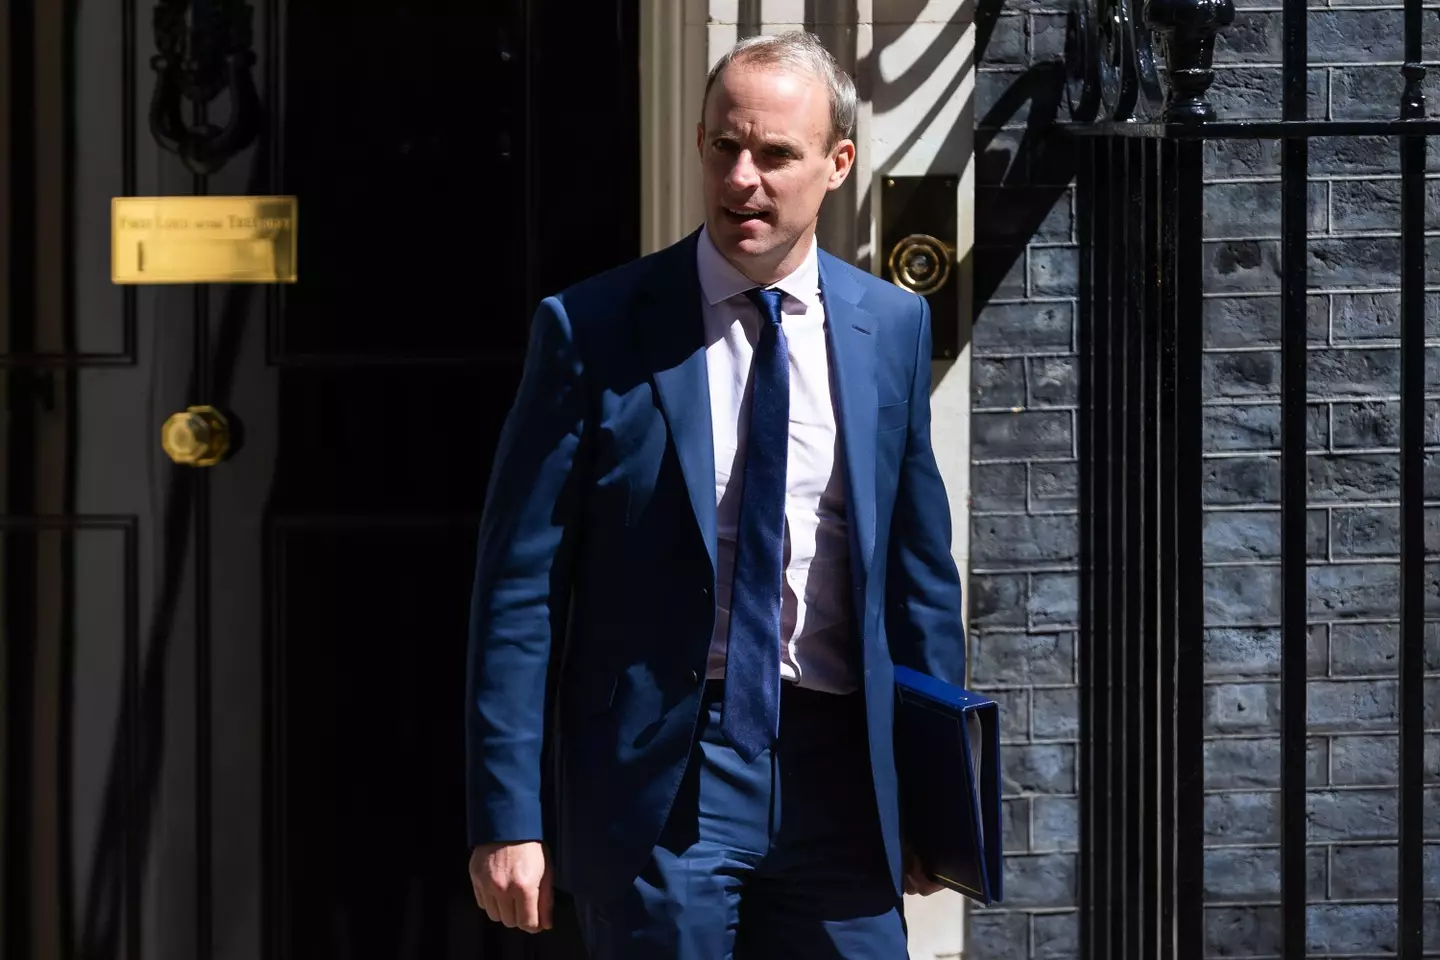 A spokesperson said Dominic Raab had been made aware of Johnson's operation in advance.